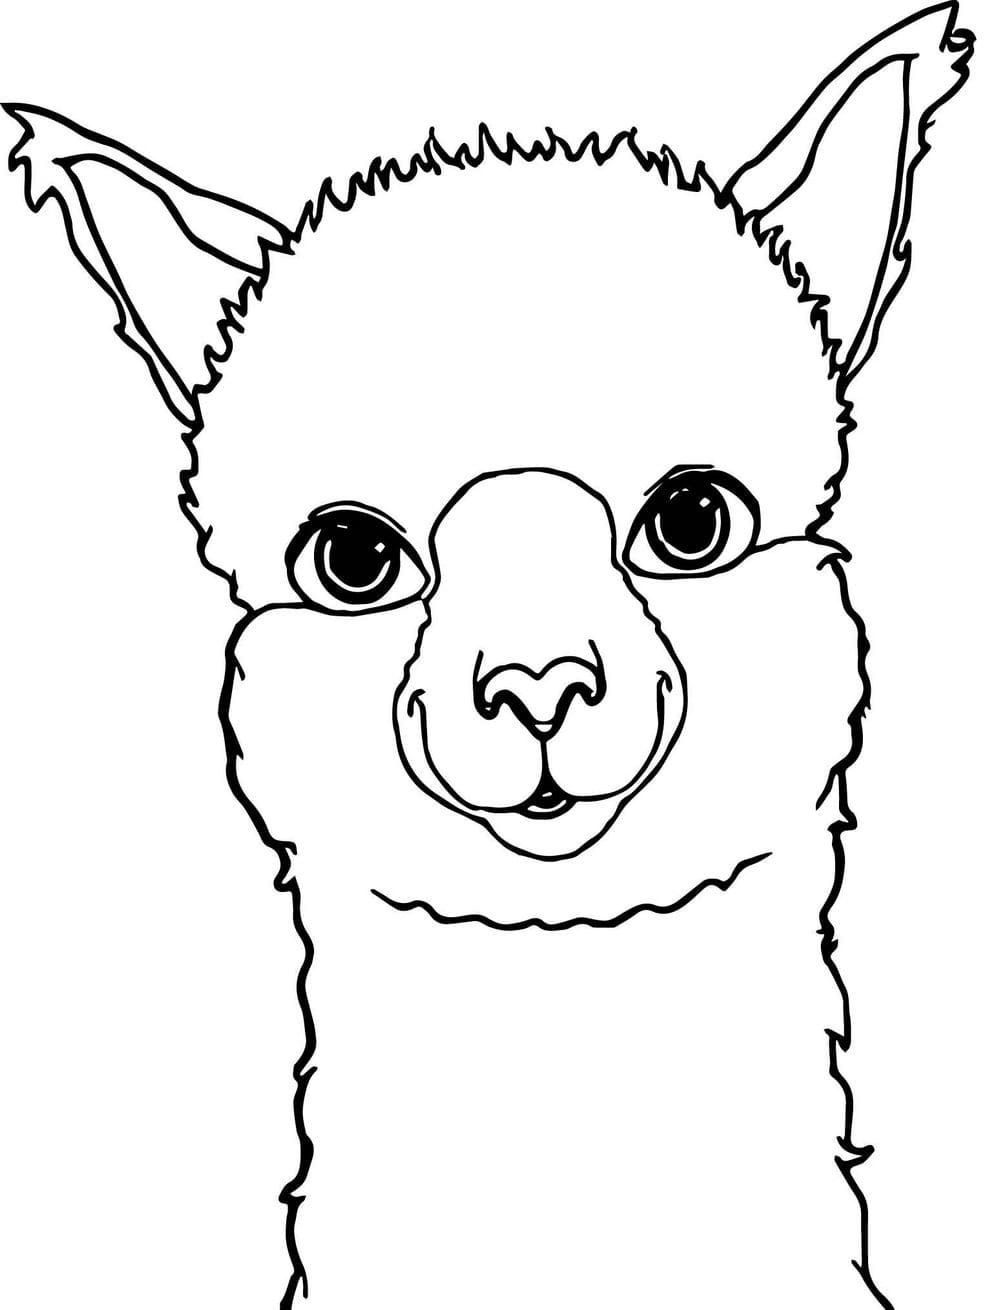 Llama Coloring Pages 100 Printable coloring pages